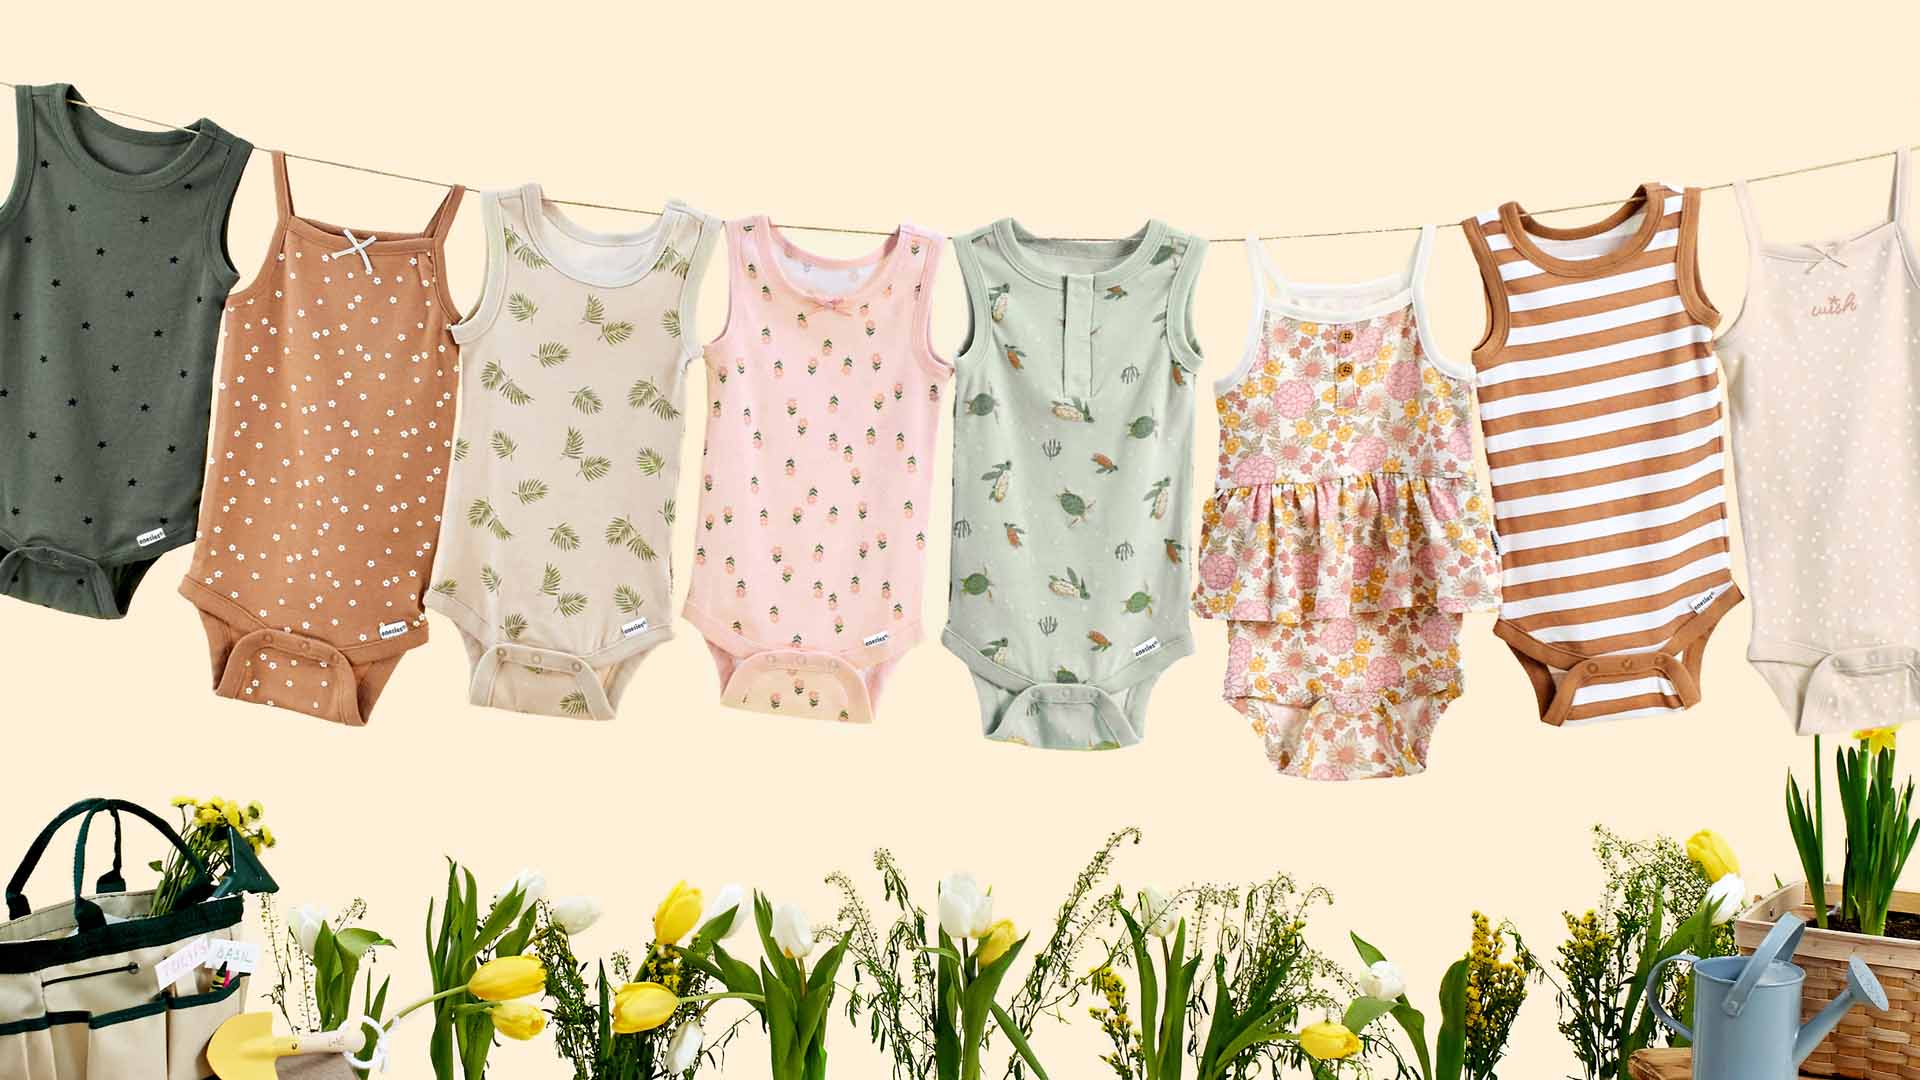 Boy and girl tank style onesie bodysuits hanging from a clothesline.